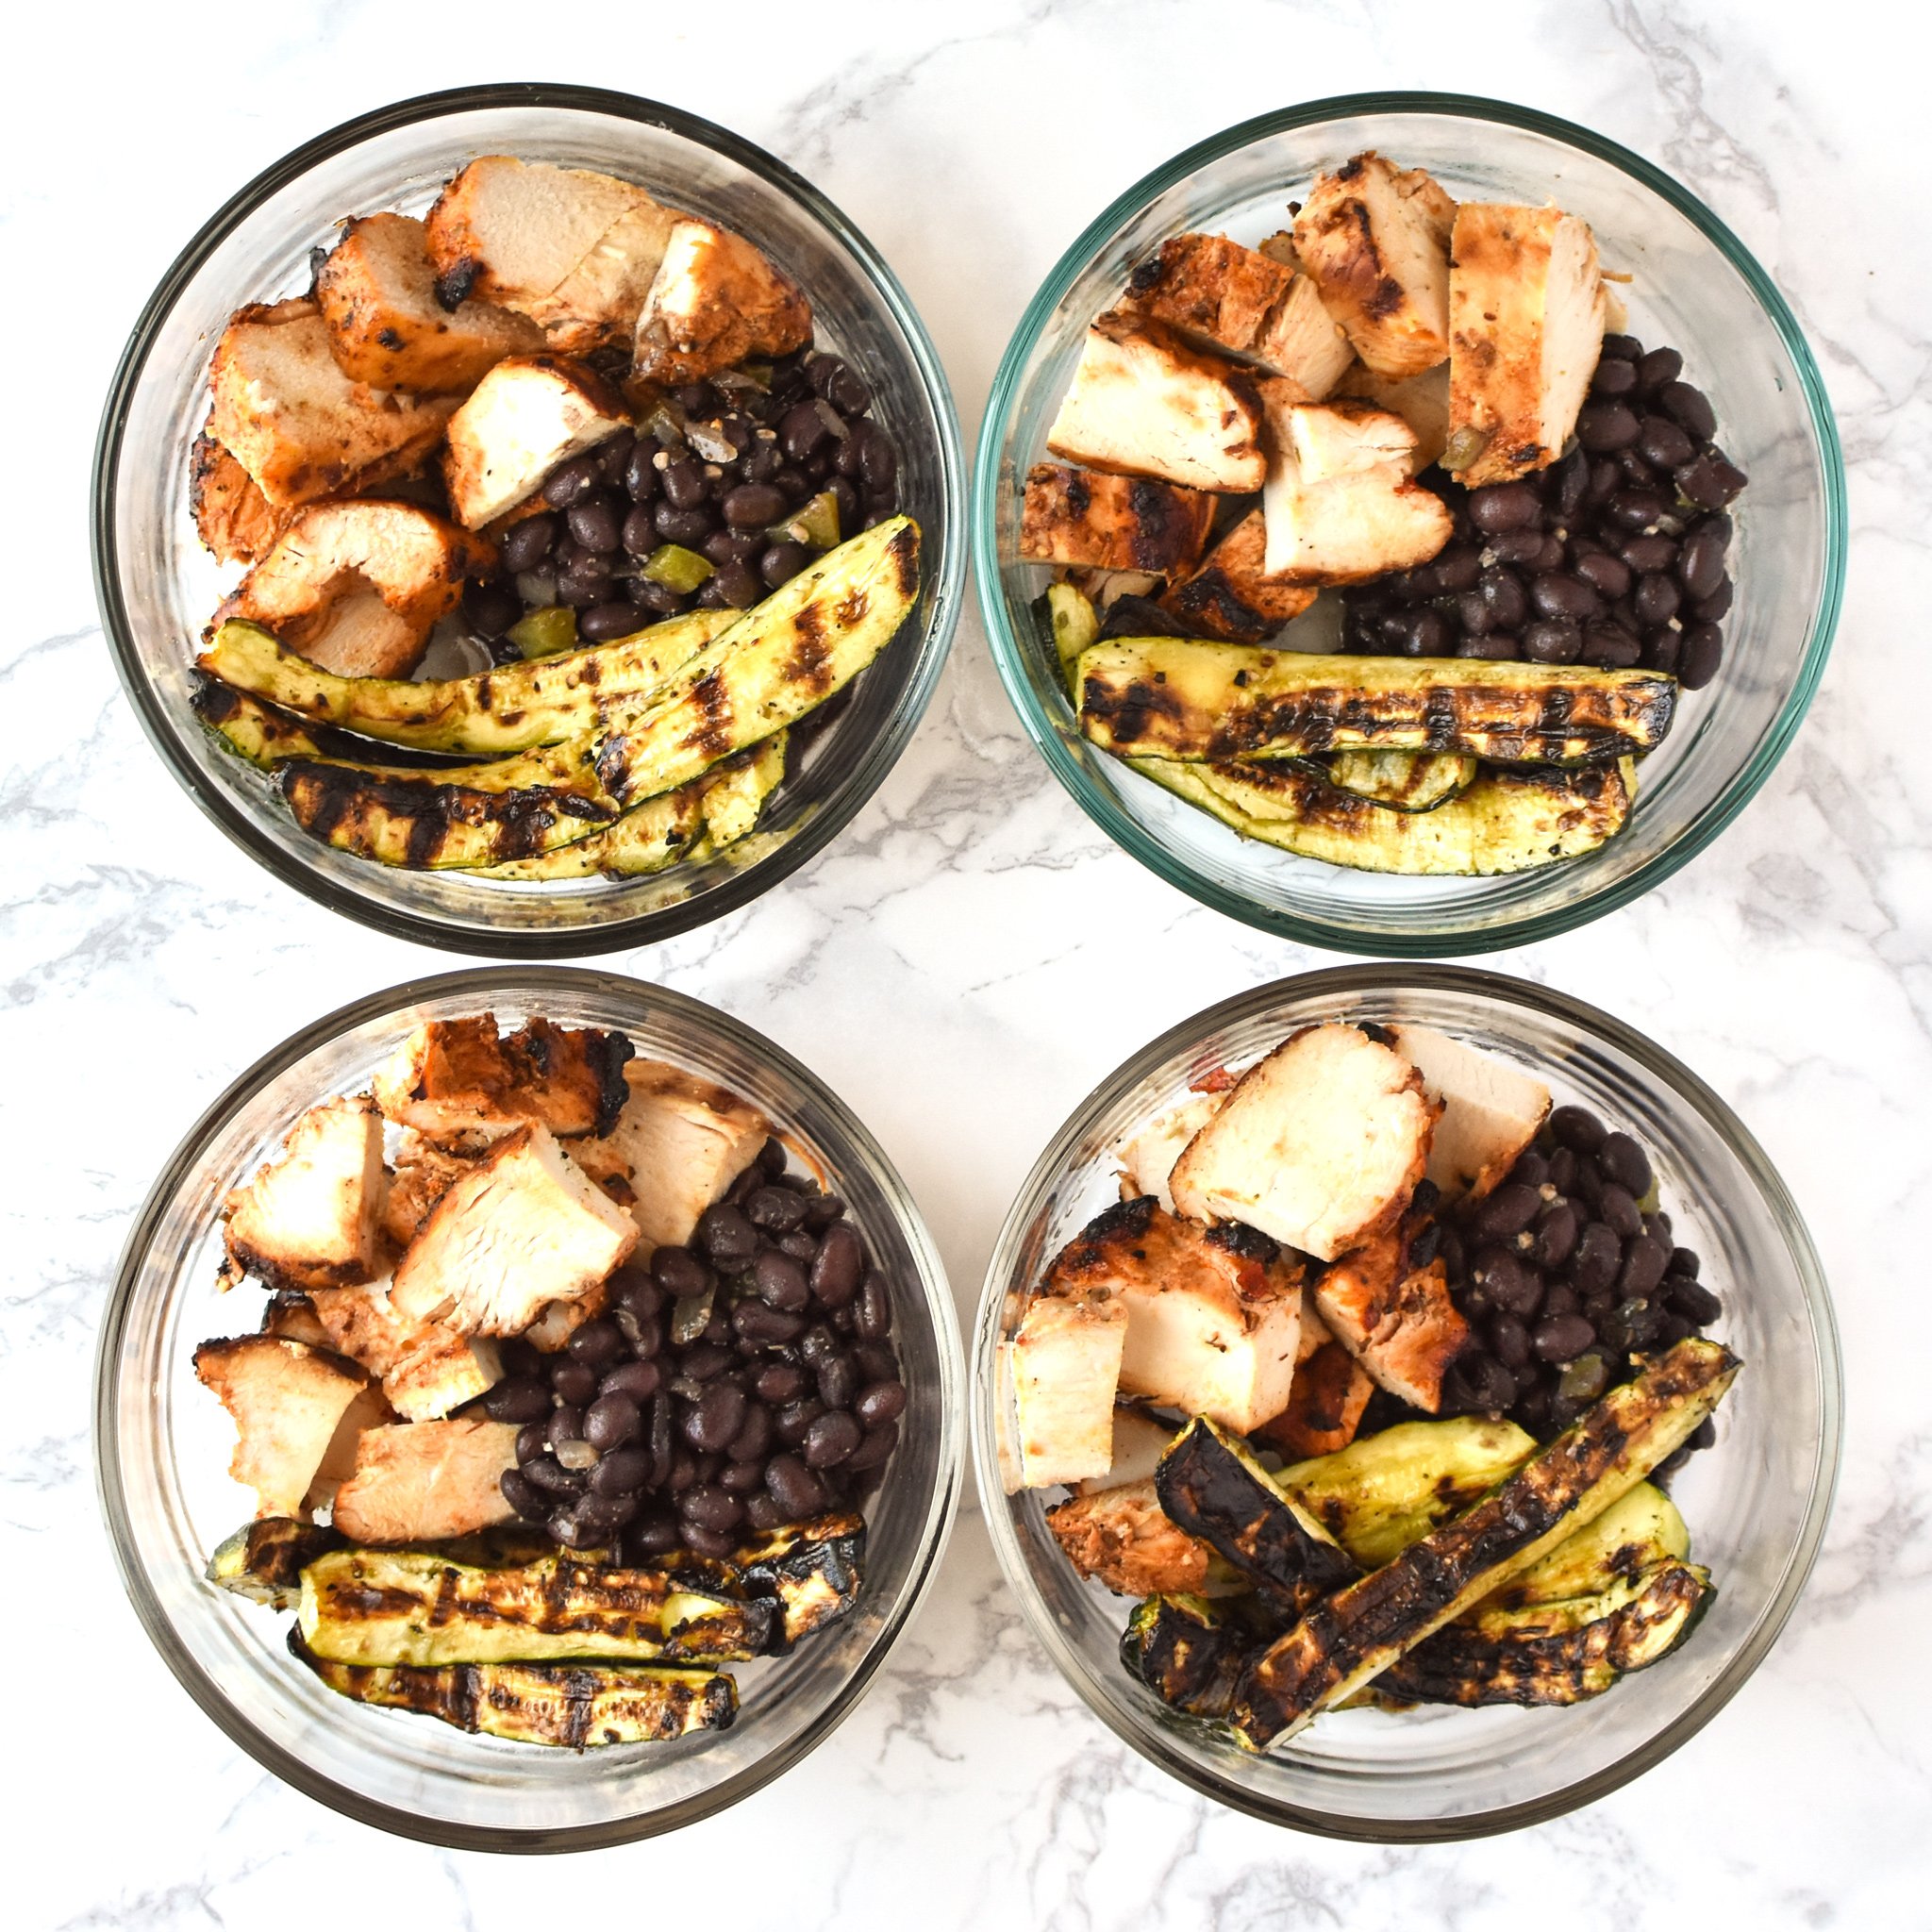 Meal Prep Chipotle Grilled Chicken - Perfect grilled chicken with seasoned black beans and zucchini. Summer meal prep happiness! - ProjectMealPlan.com